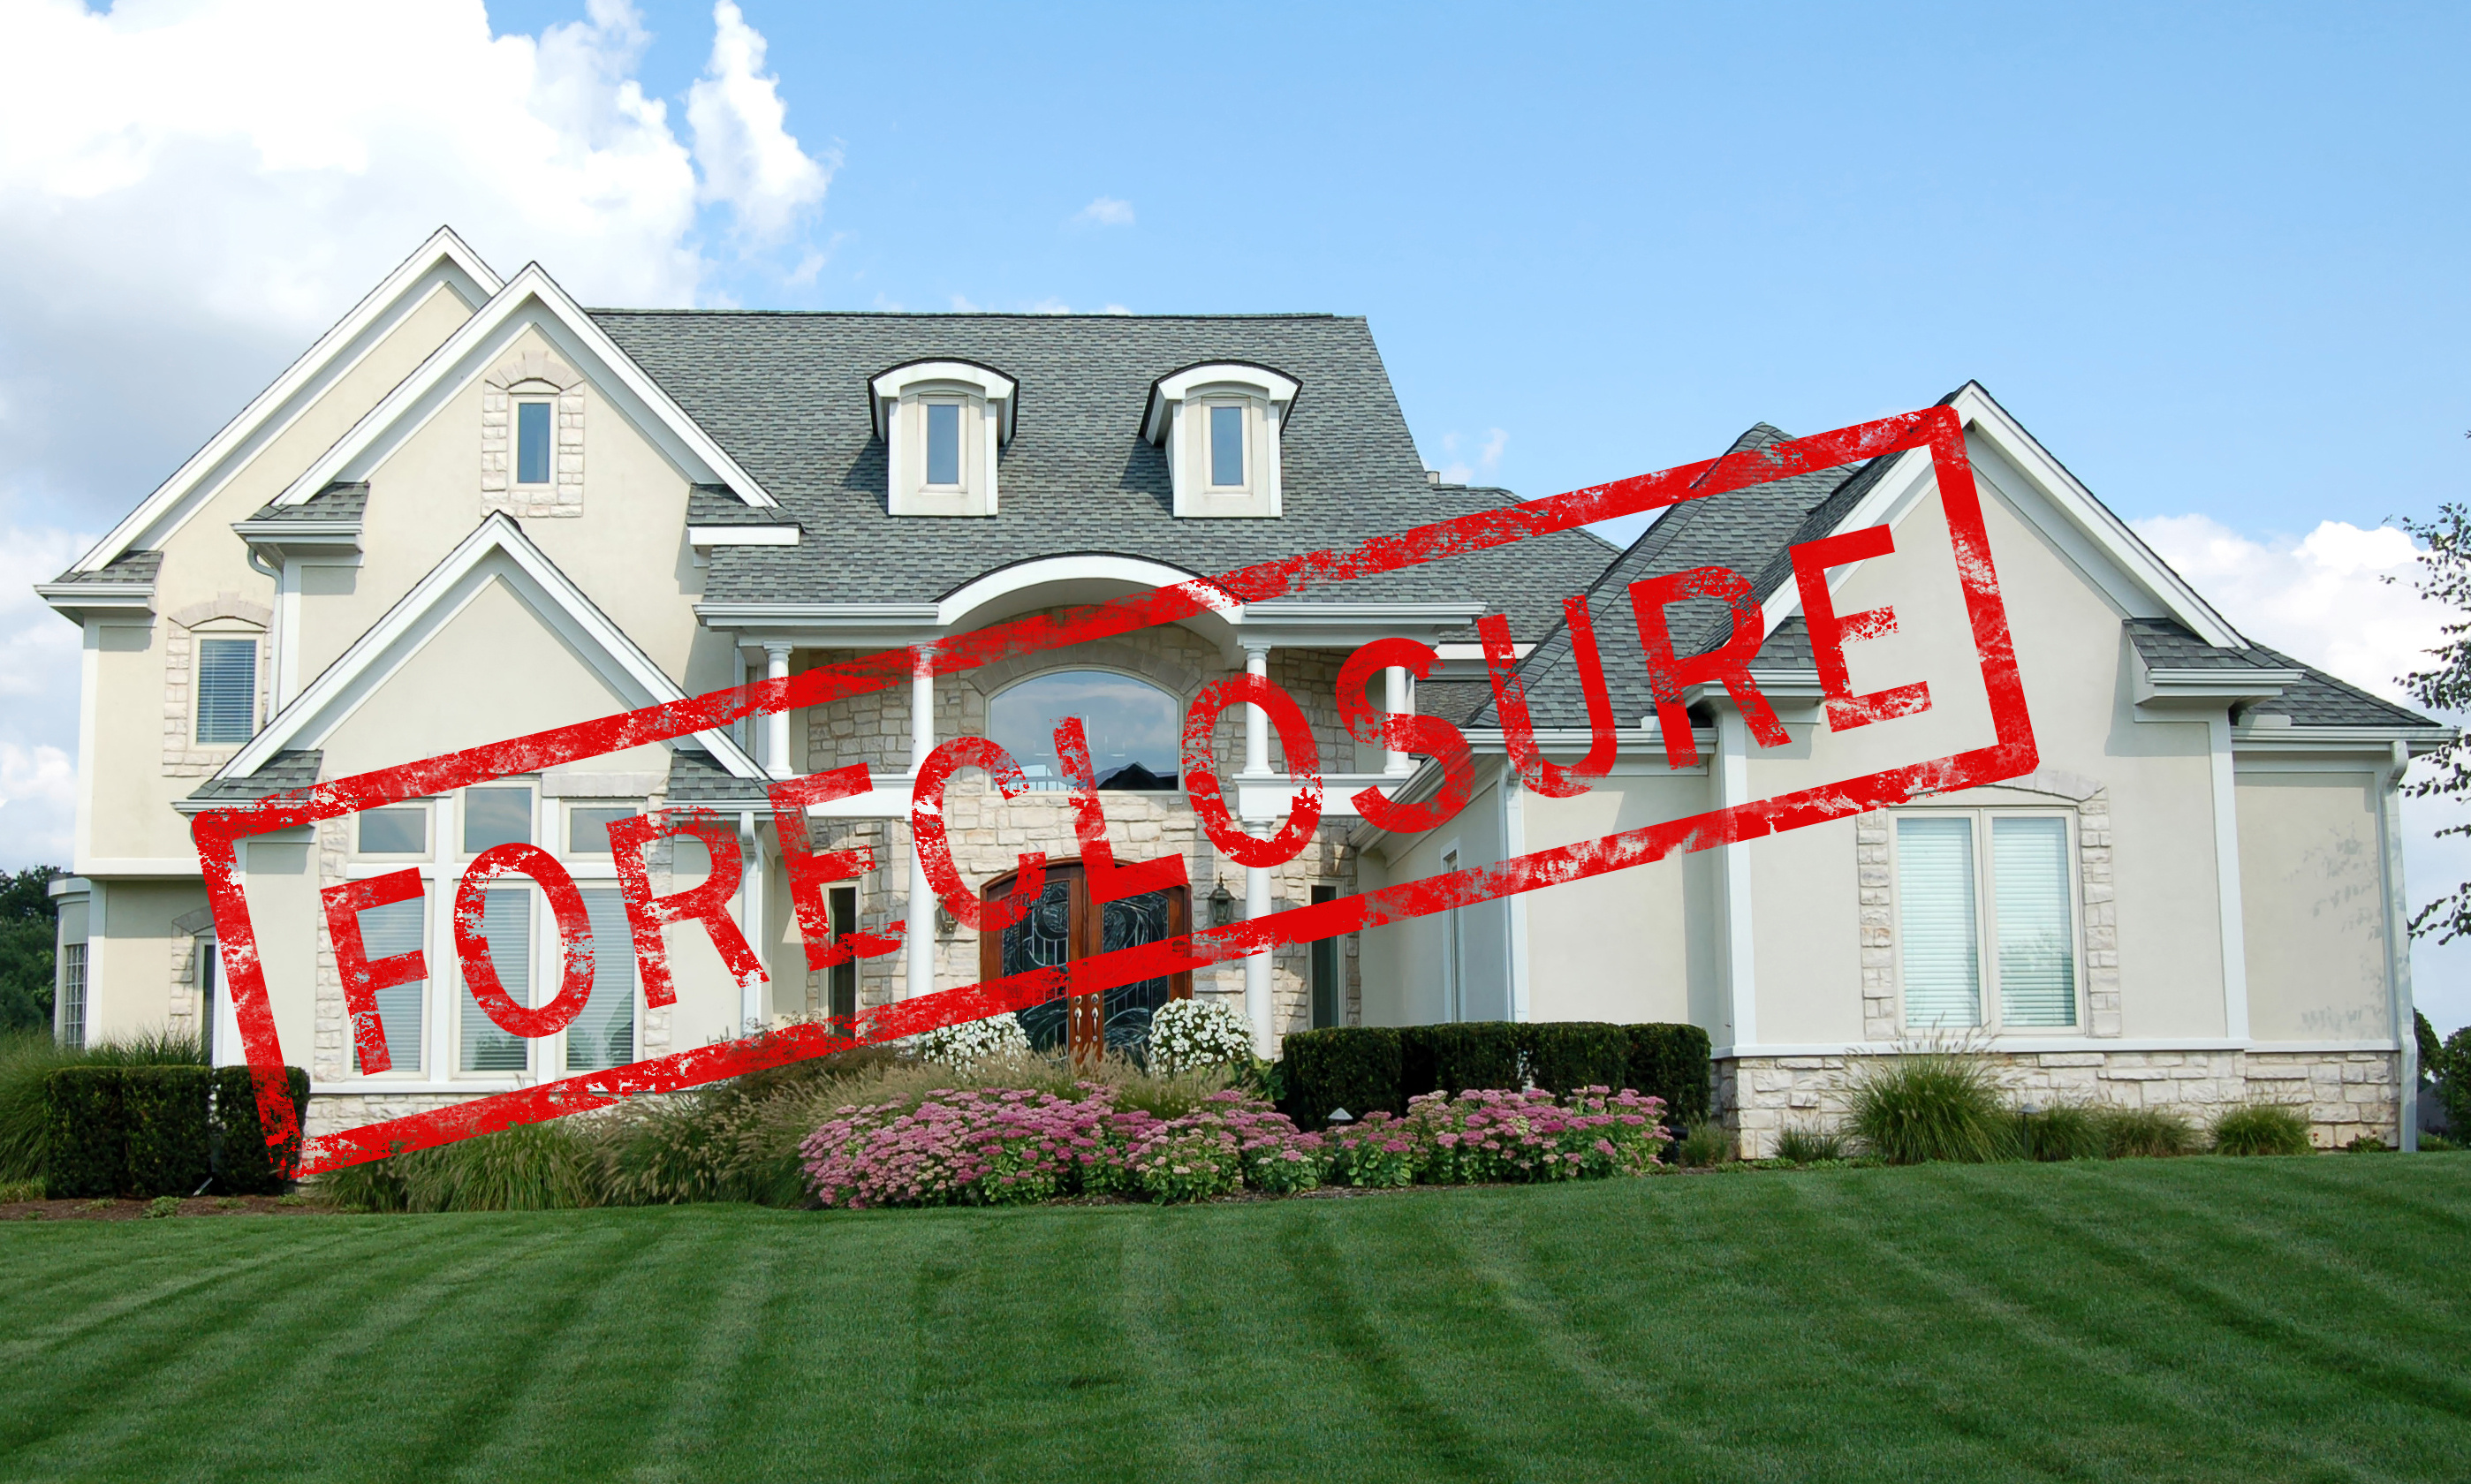 Call True South Appraisals, LLC to order valuations for Greenville foreclosures